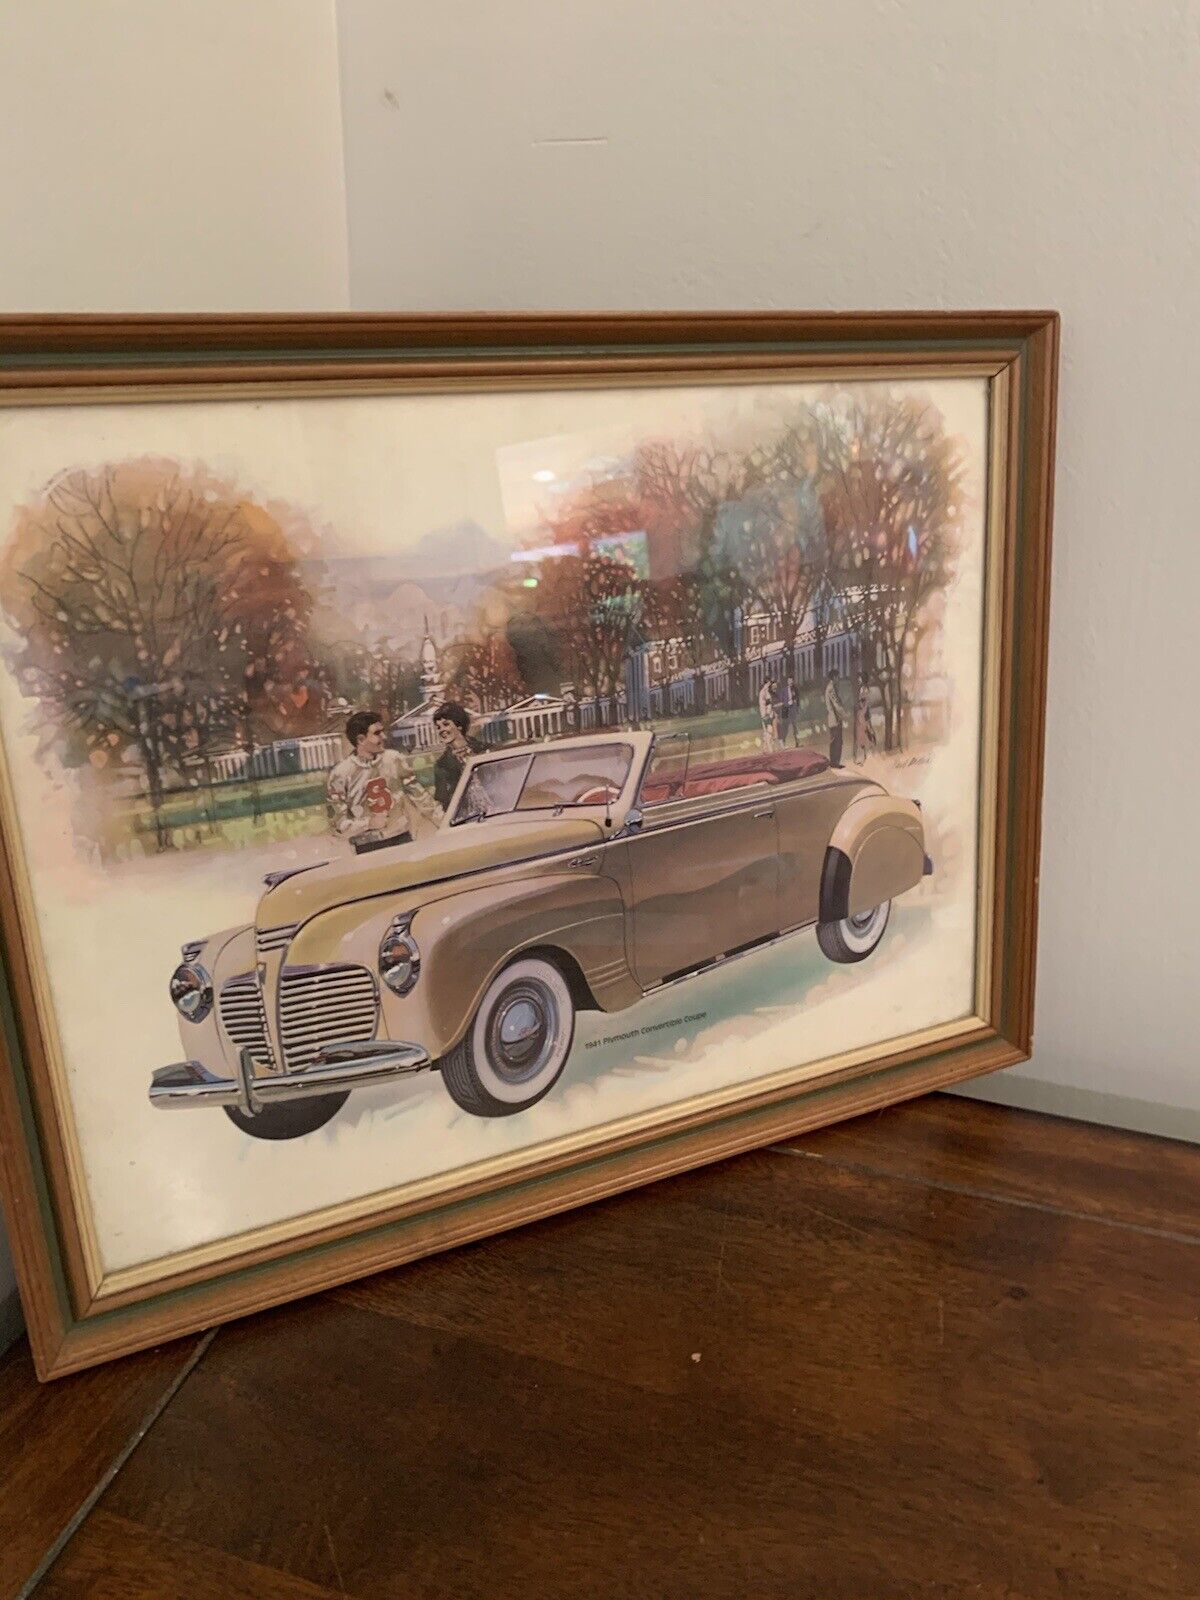 Vintage Paul Melia Car Print / Poster - 1941 Plymouth Convertible Coupe 18